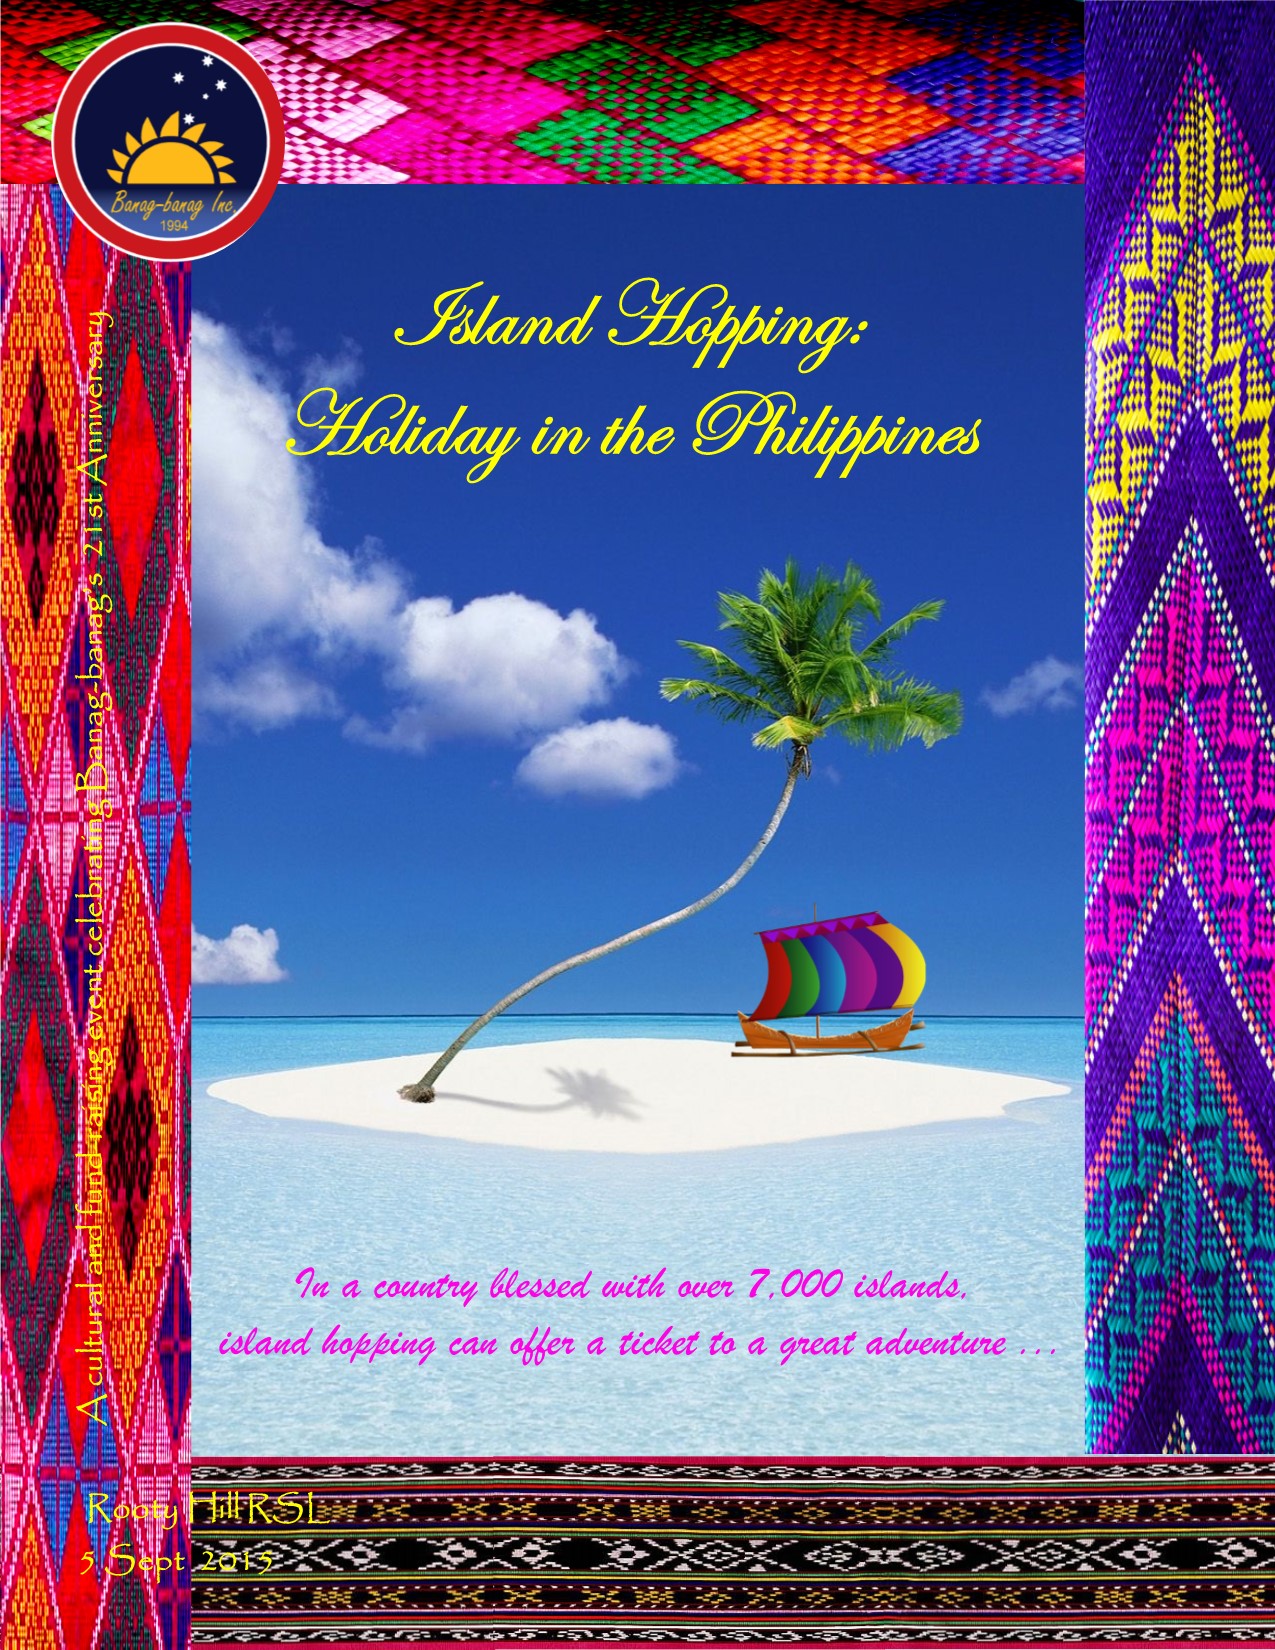 Island Hopping Holiday in the Philippines